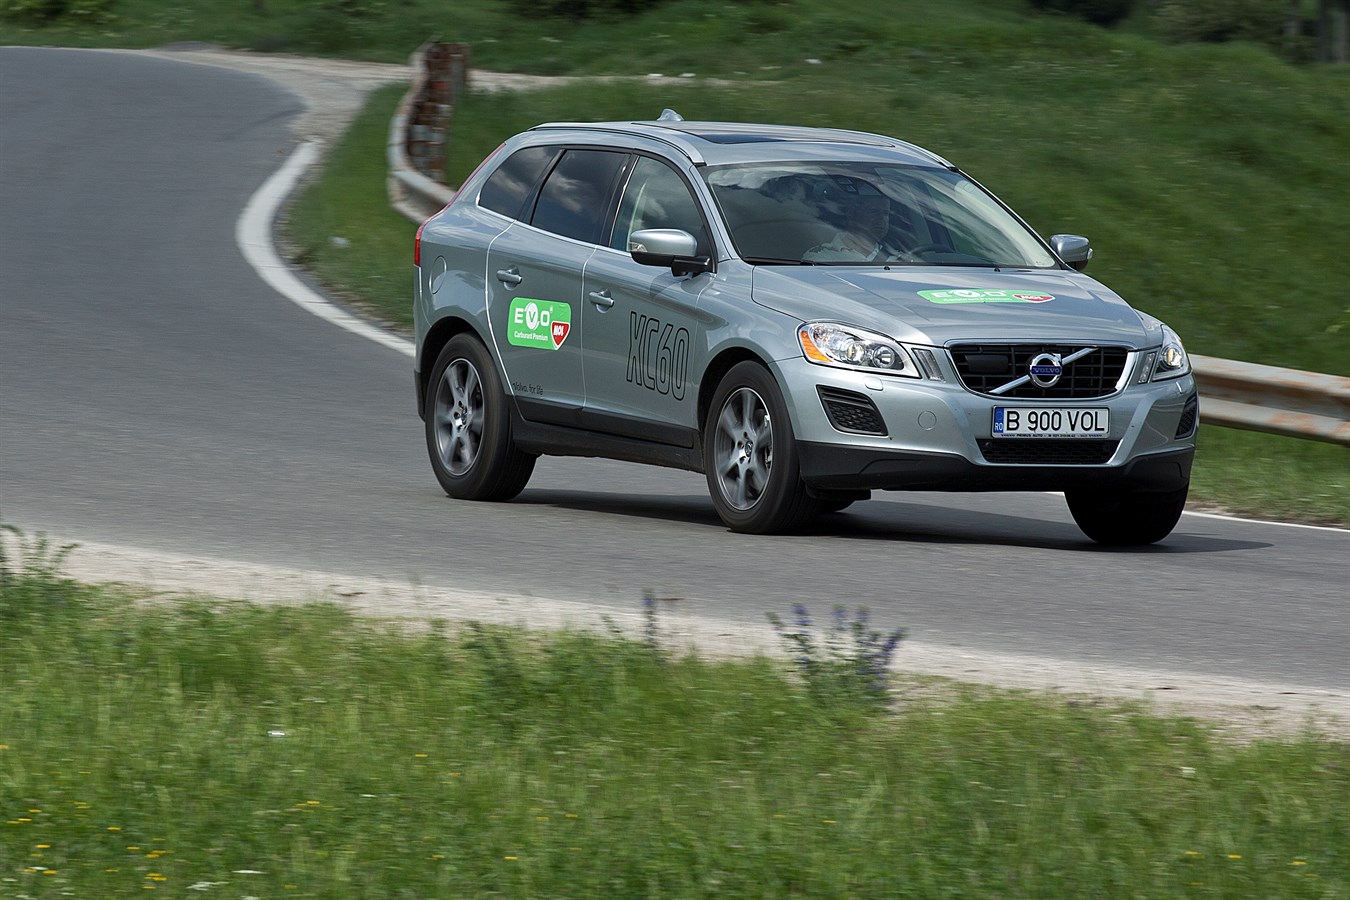 Tough driving conditions - The Volvo XC60 was appointed: Best 4x4 Premium SUV 2011 in Romania